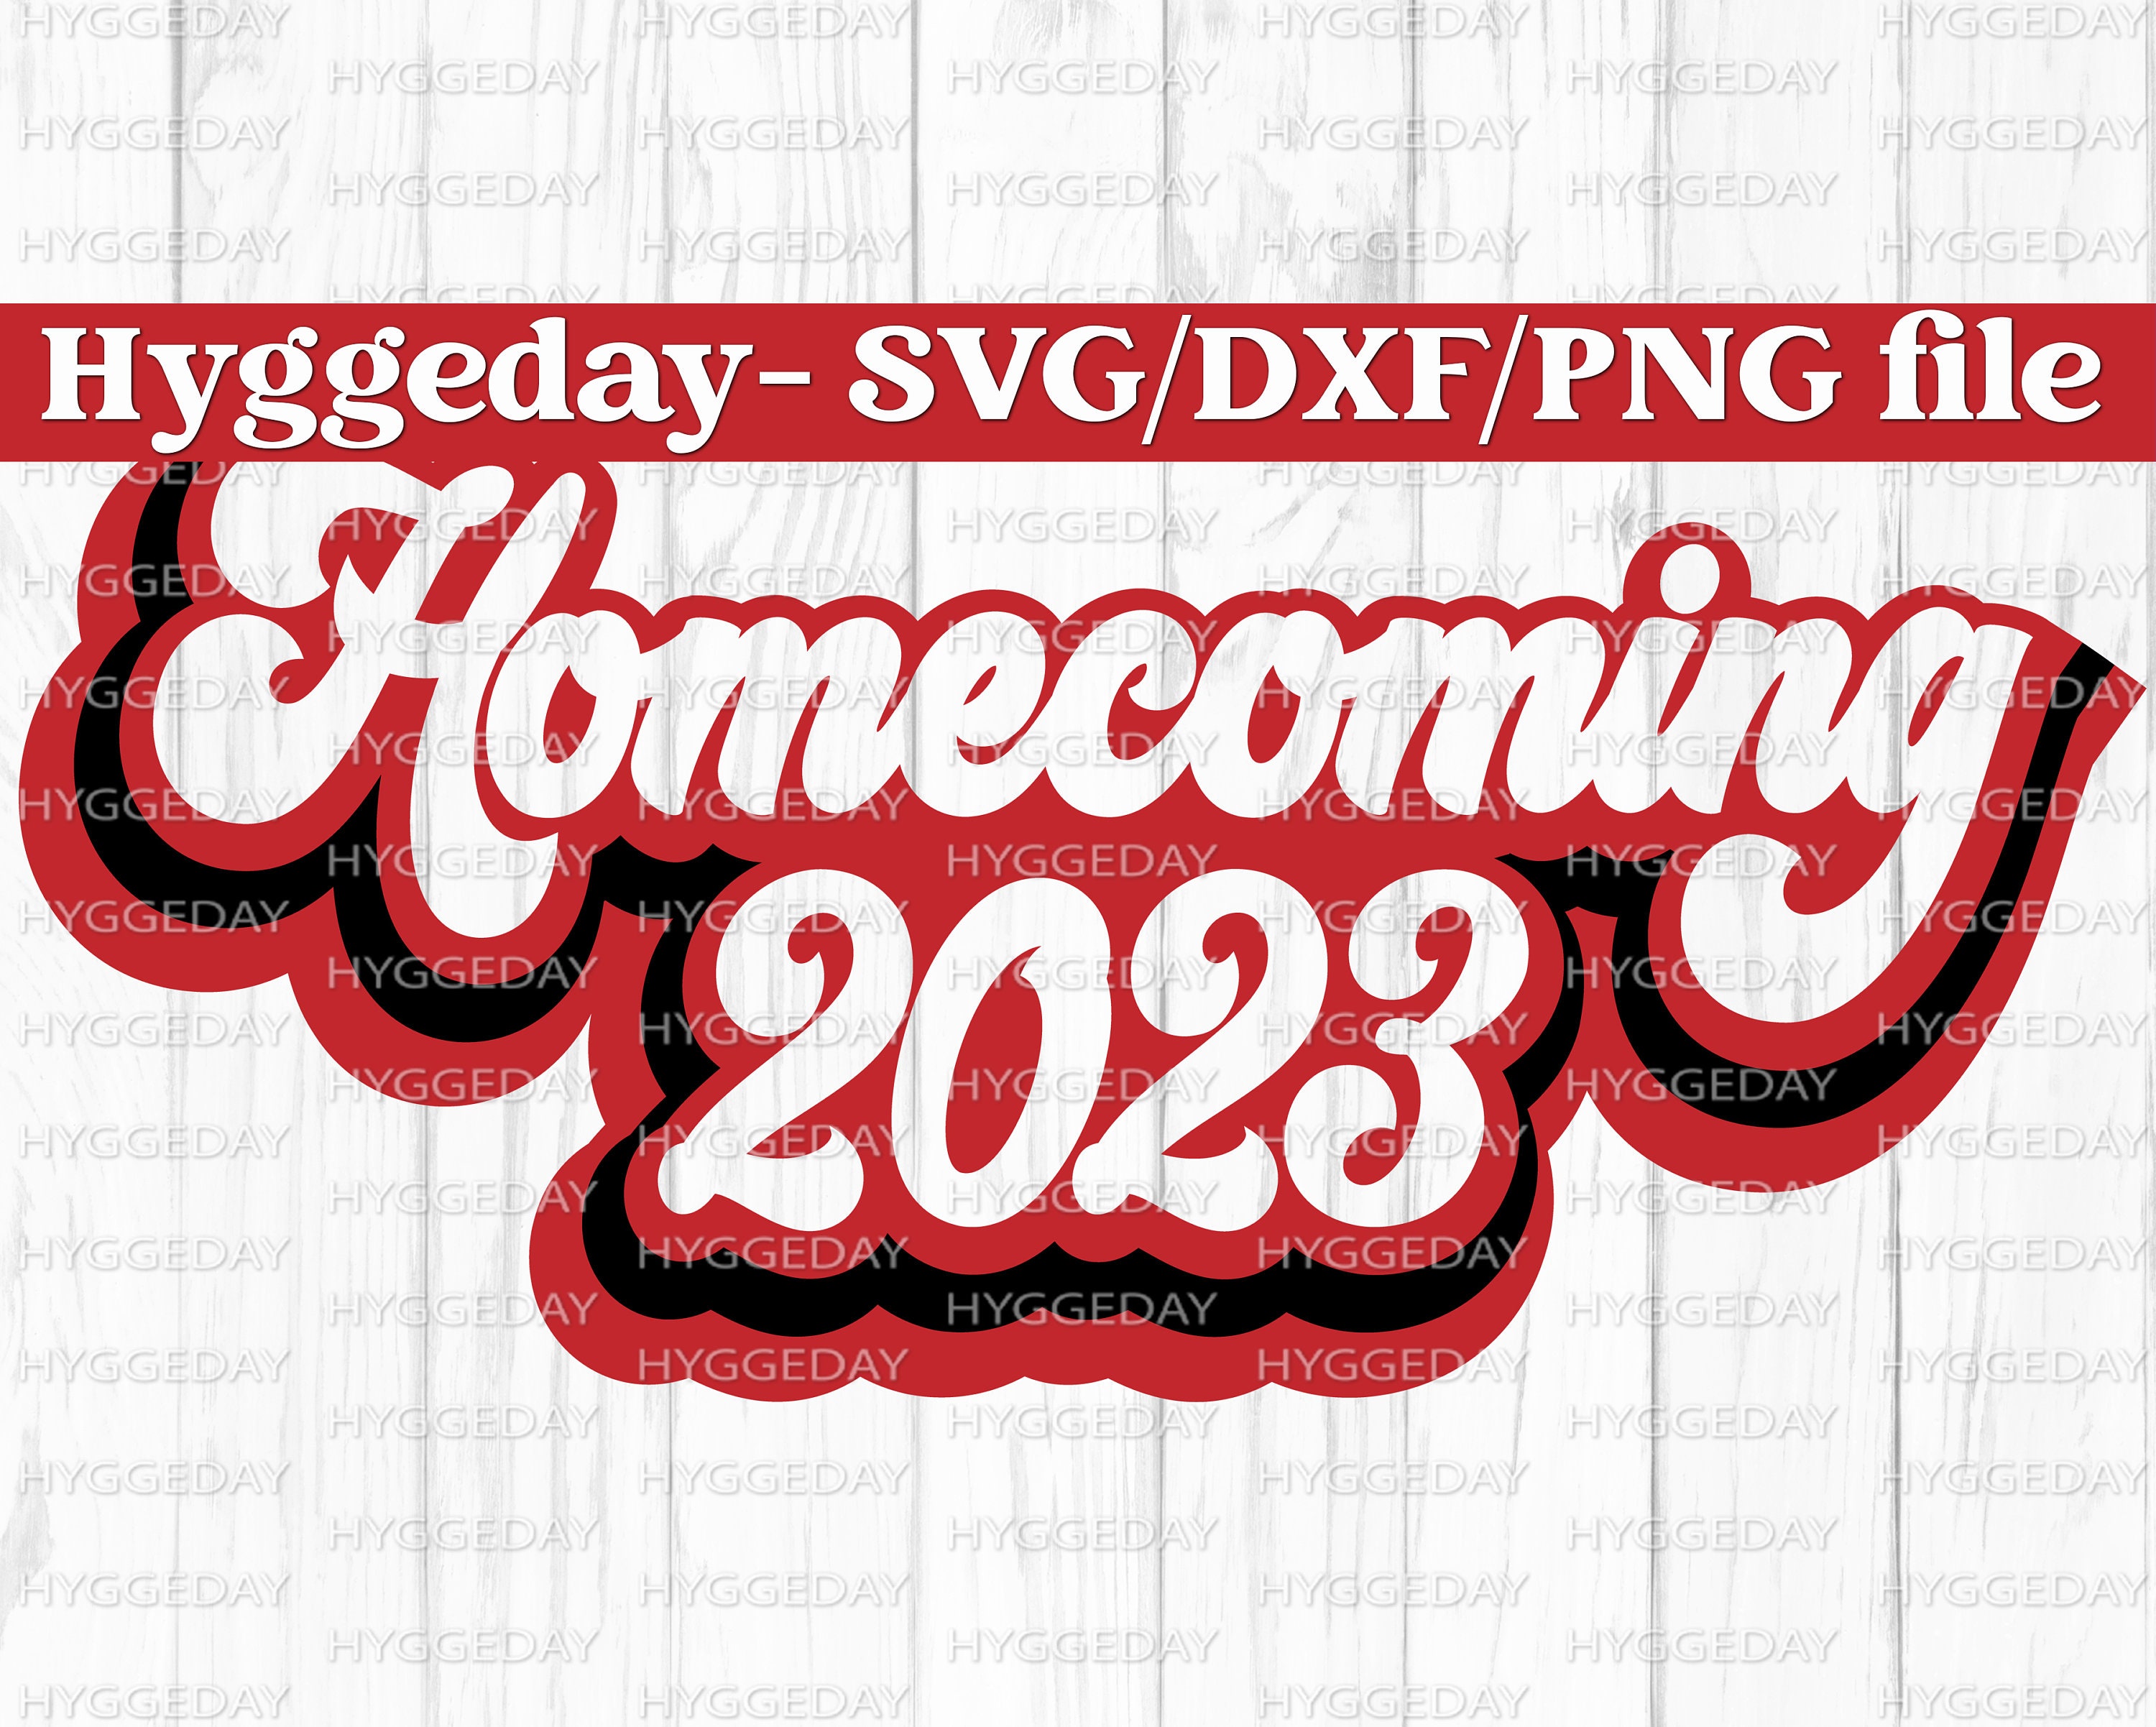 Homecoming Sticker for Sale by arbytrationn